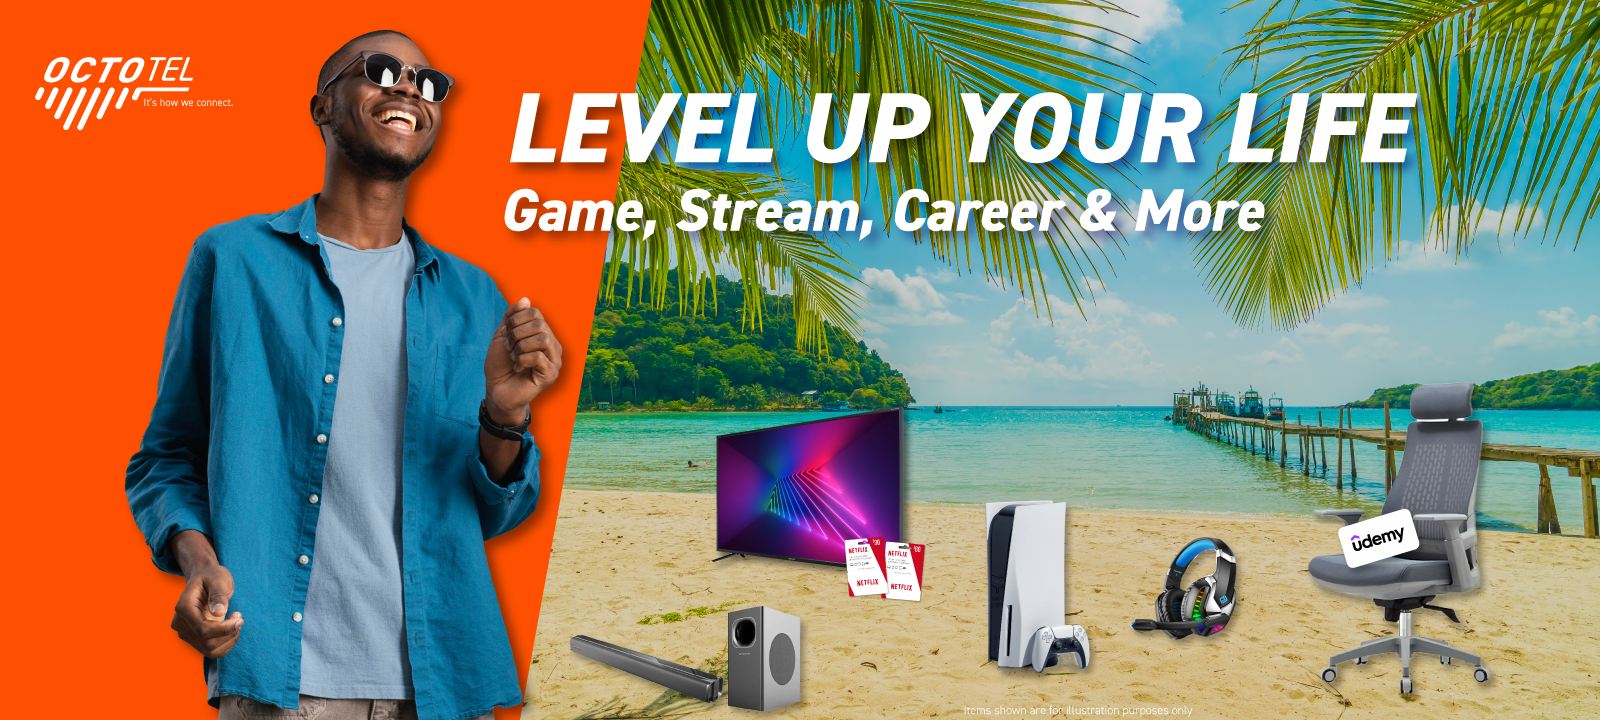 Level Up Your Life with Octotel Fibre: Gaming, Streaming, Job Opportunities, and More!